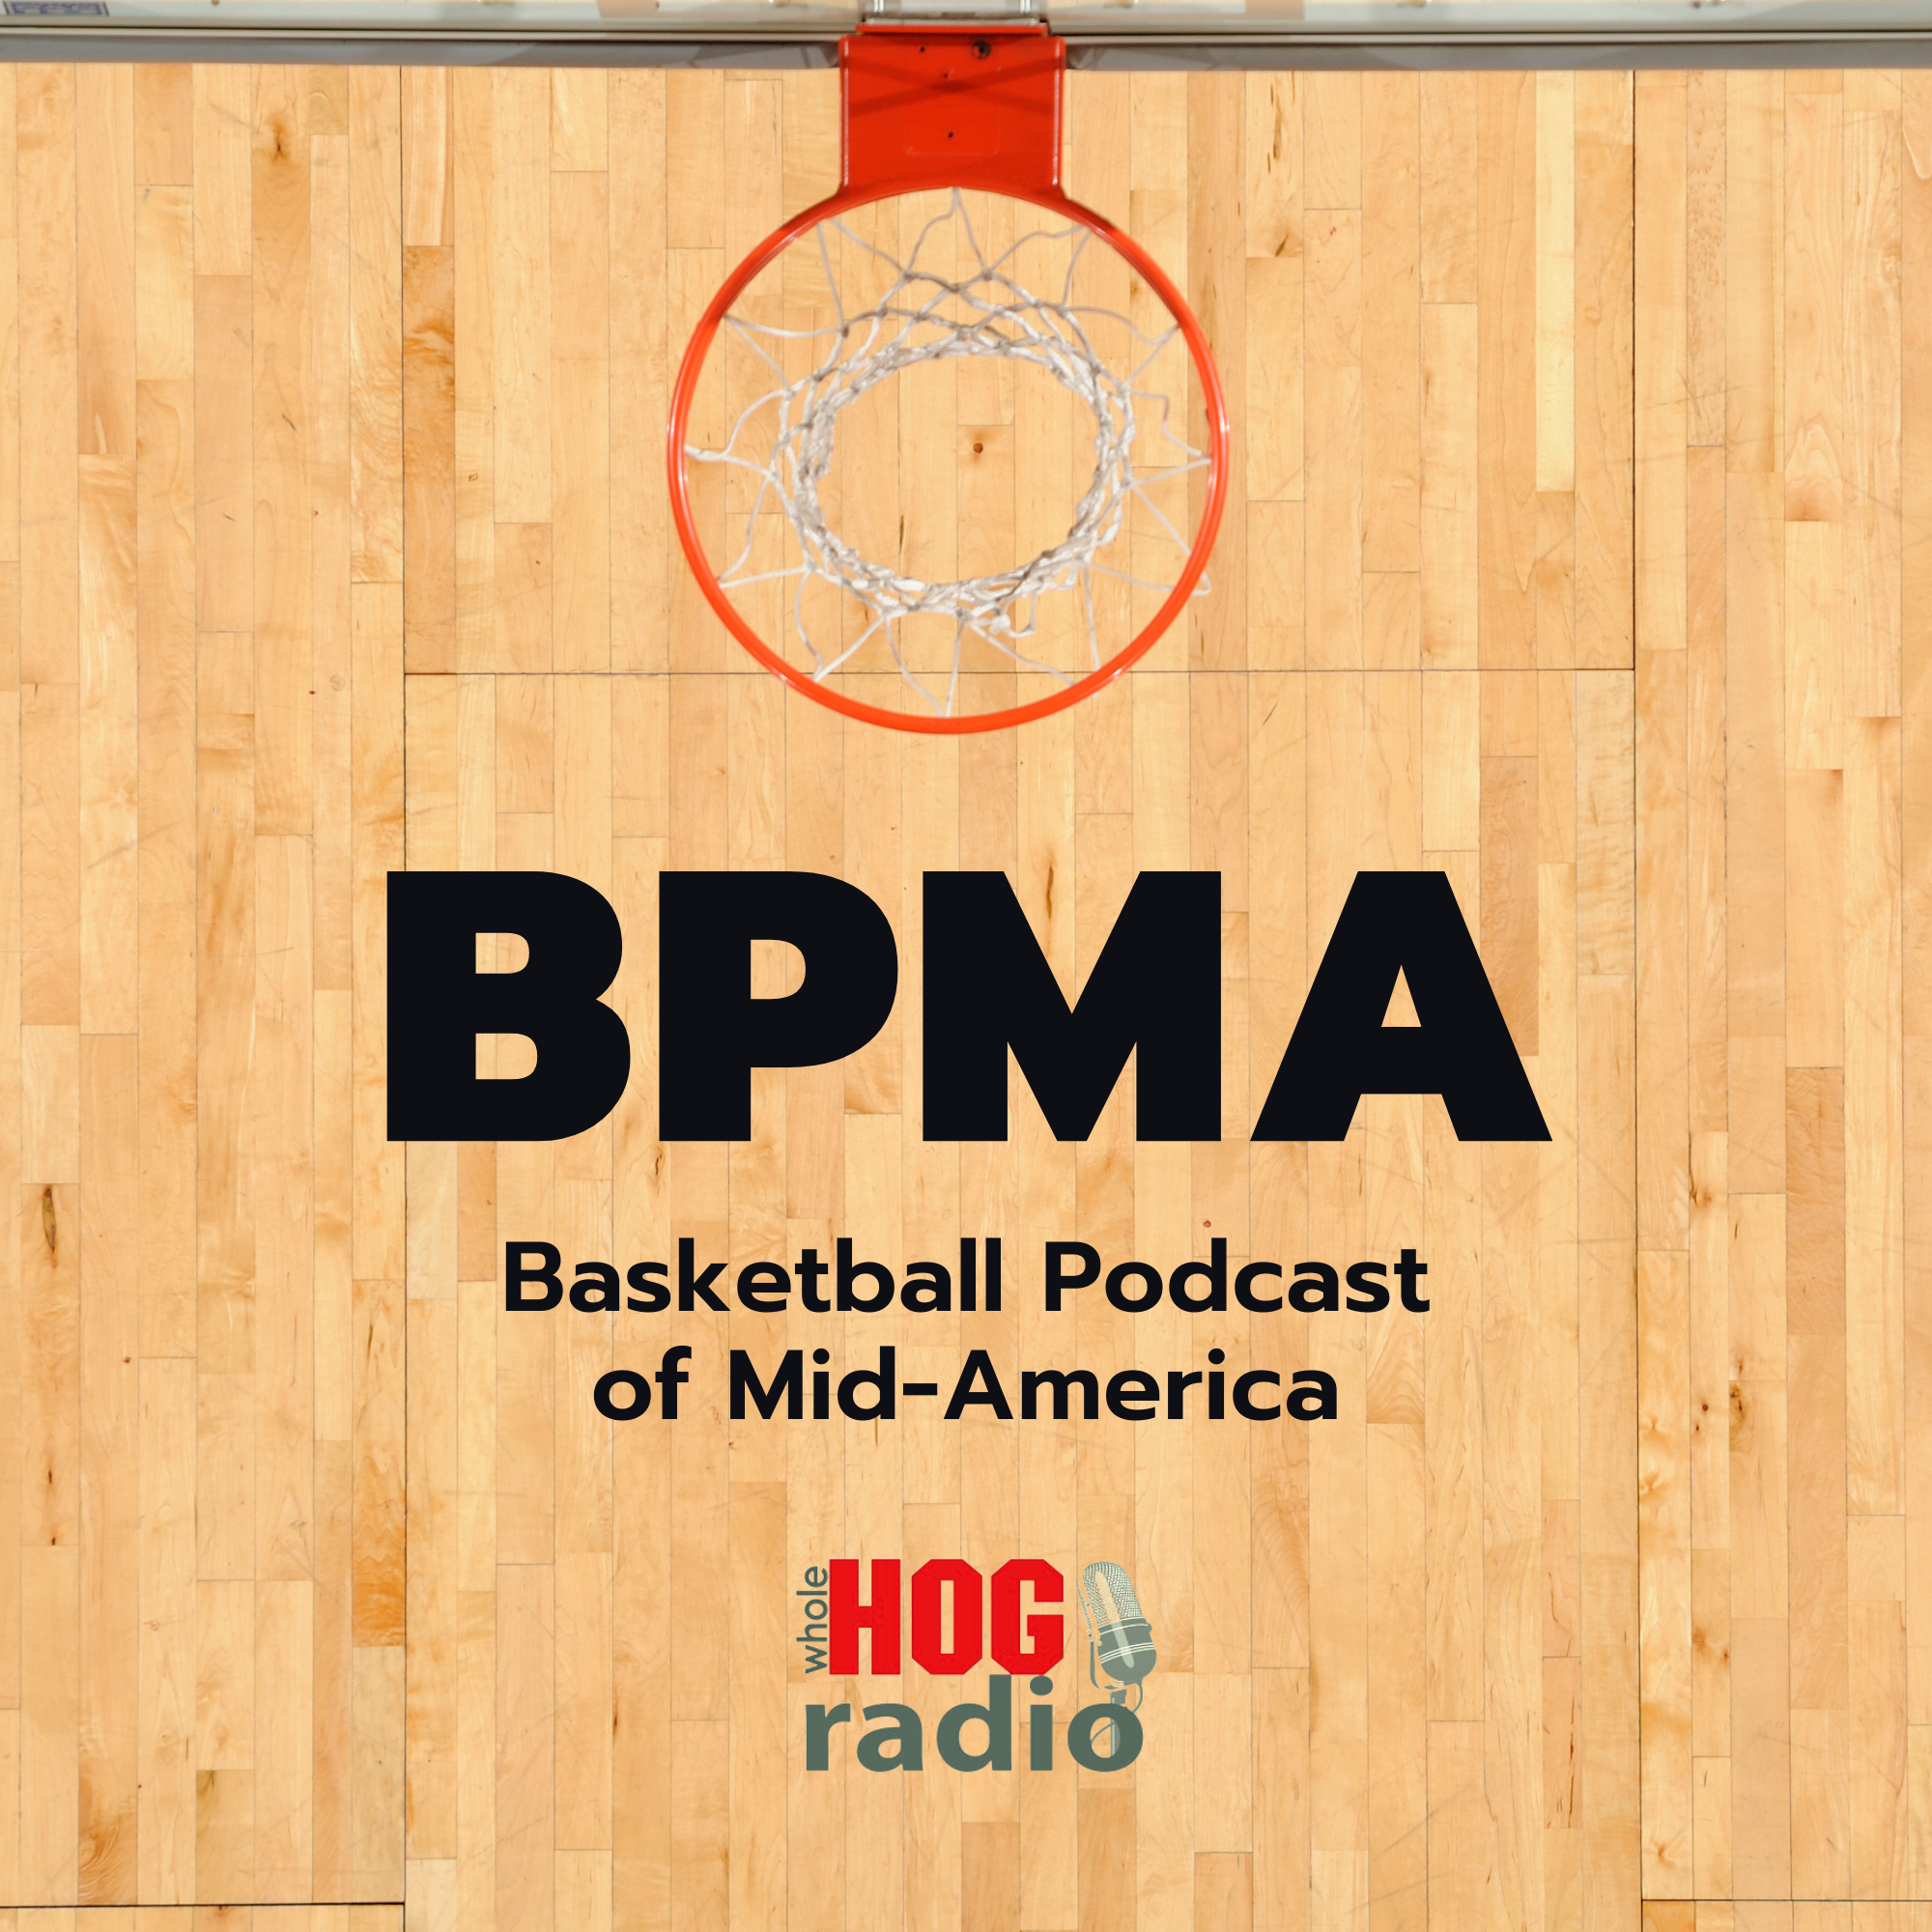 Basketball Podcast of Mid-America: Hogs Start 0-2 in SEC Play